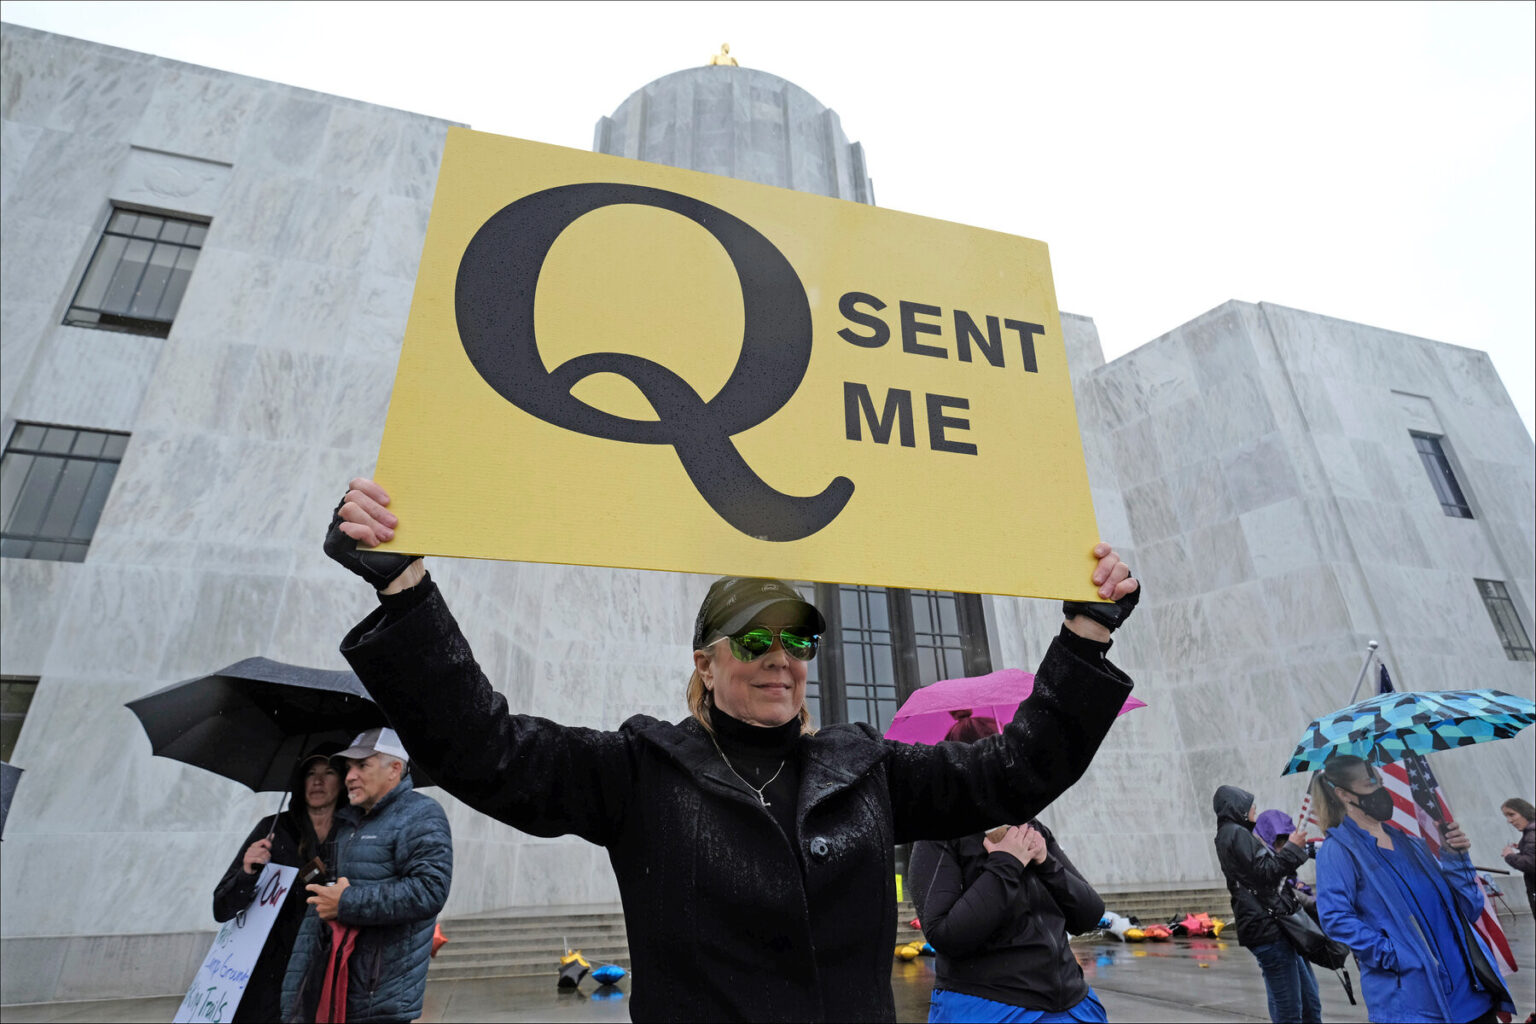 Now that Joe Biden's been sworn in, are QAnon conspiracy theories going away anytime soon? See why some sources say yes, and others say no.